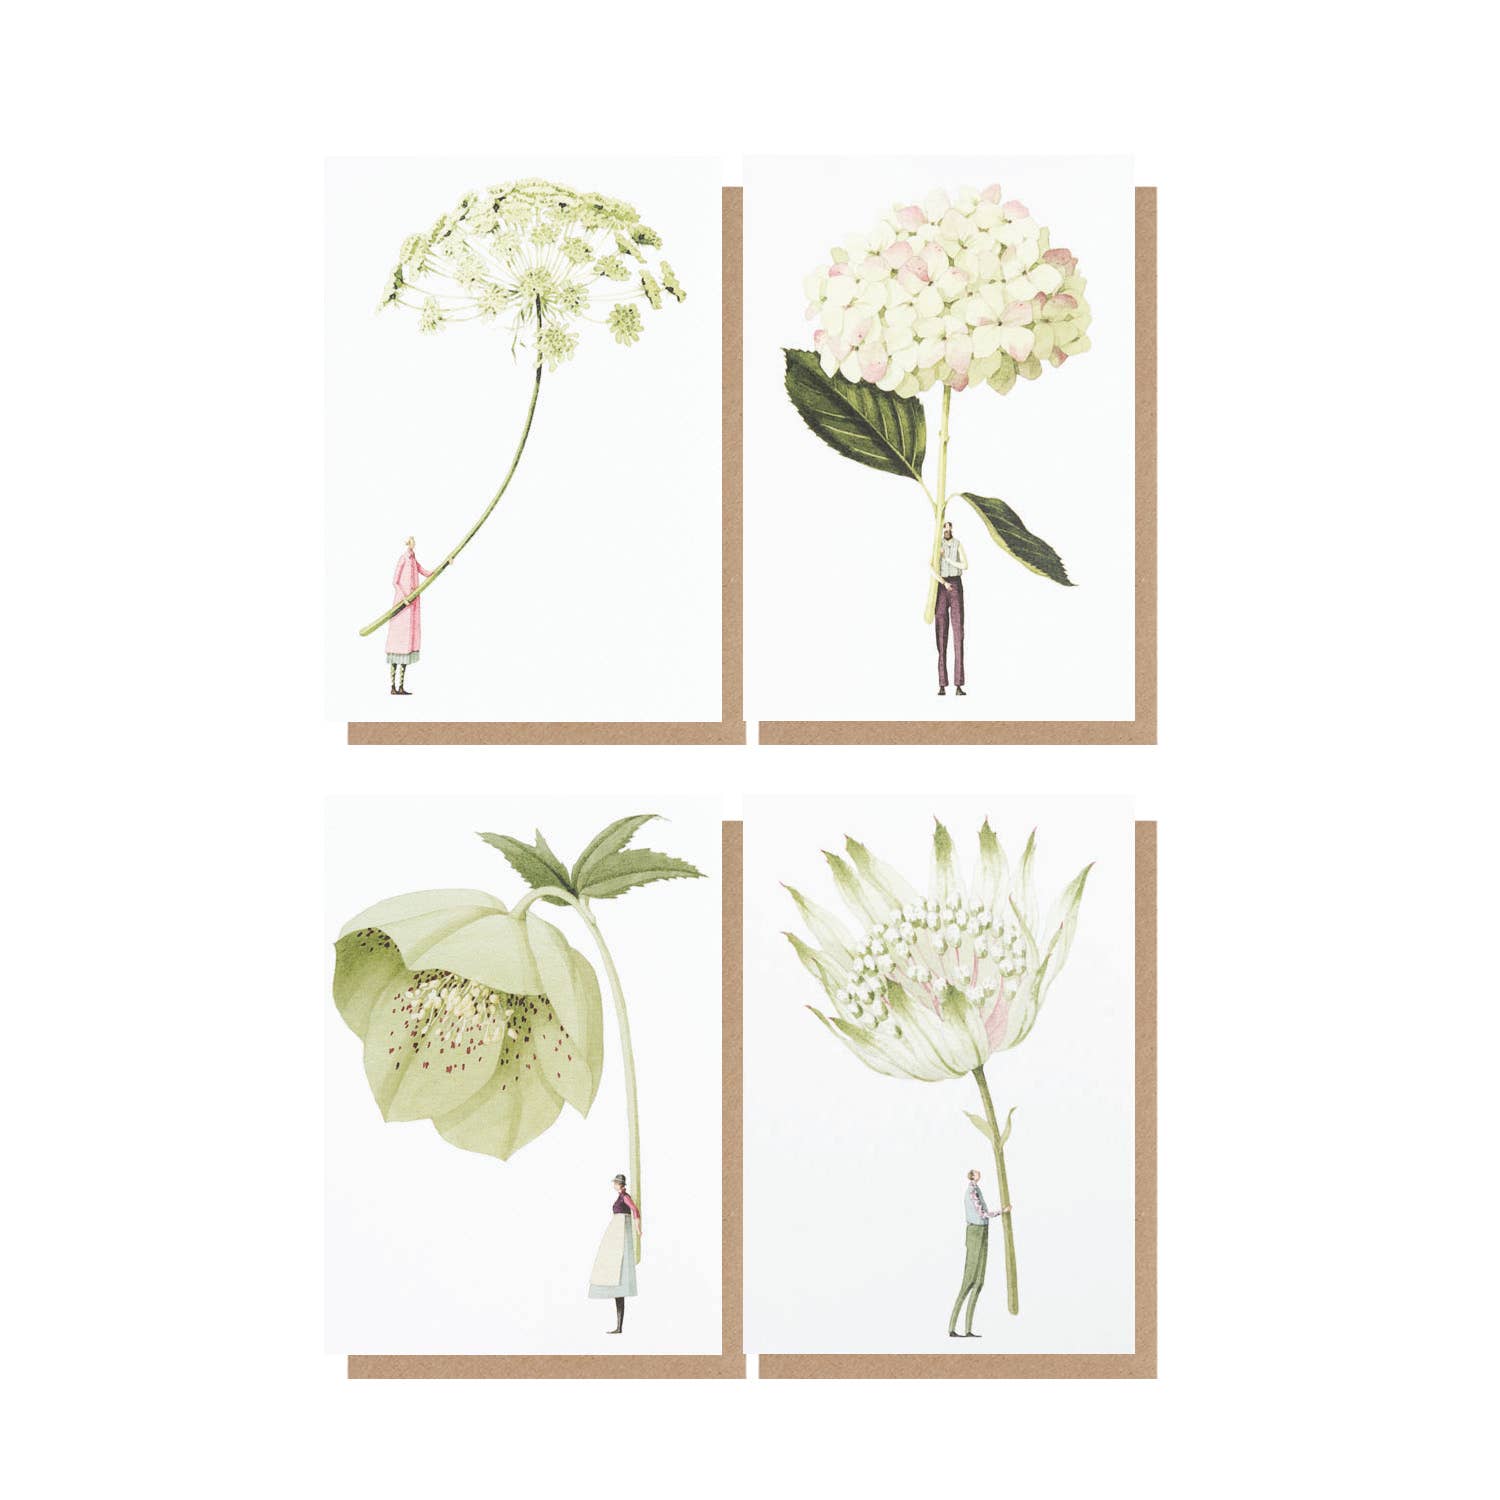 In Bloom - Notecards 3 "Green" Boxed Set